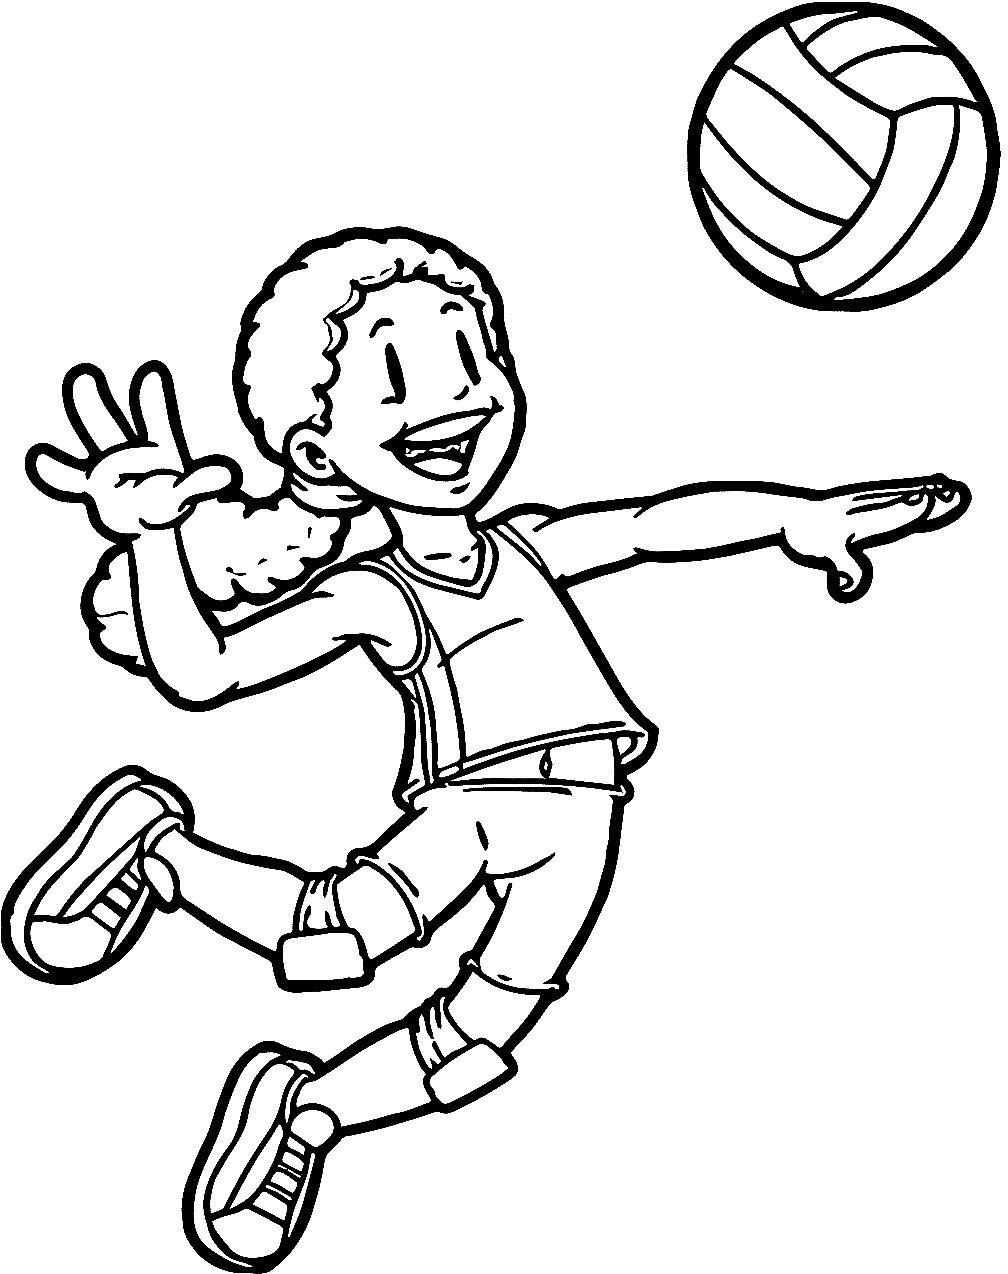 Girl Volleyball Player Coloring Pages